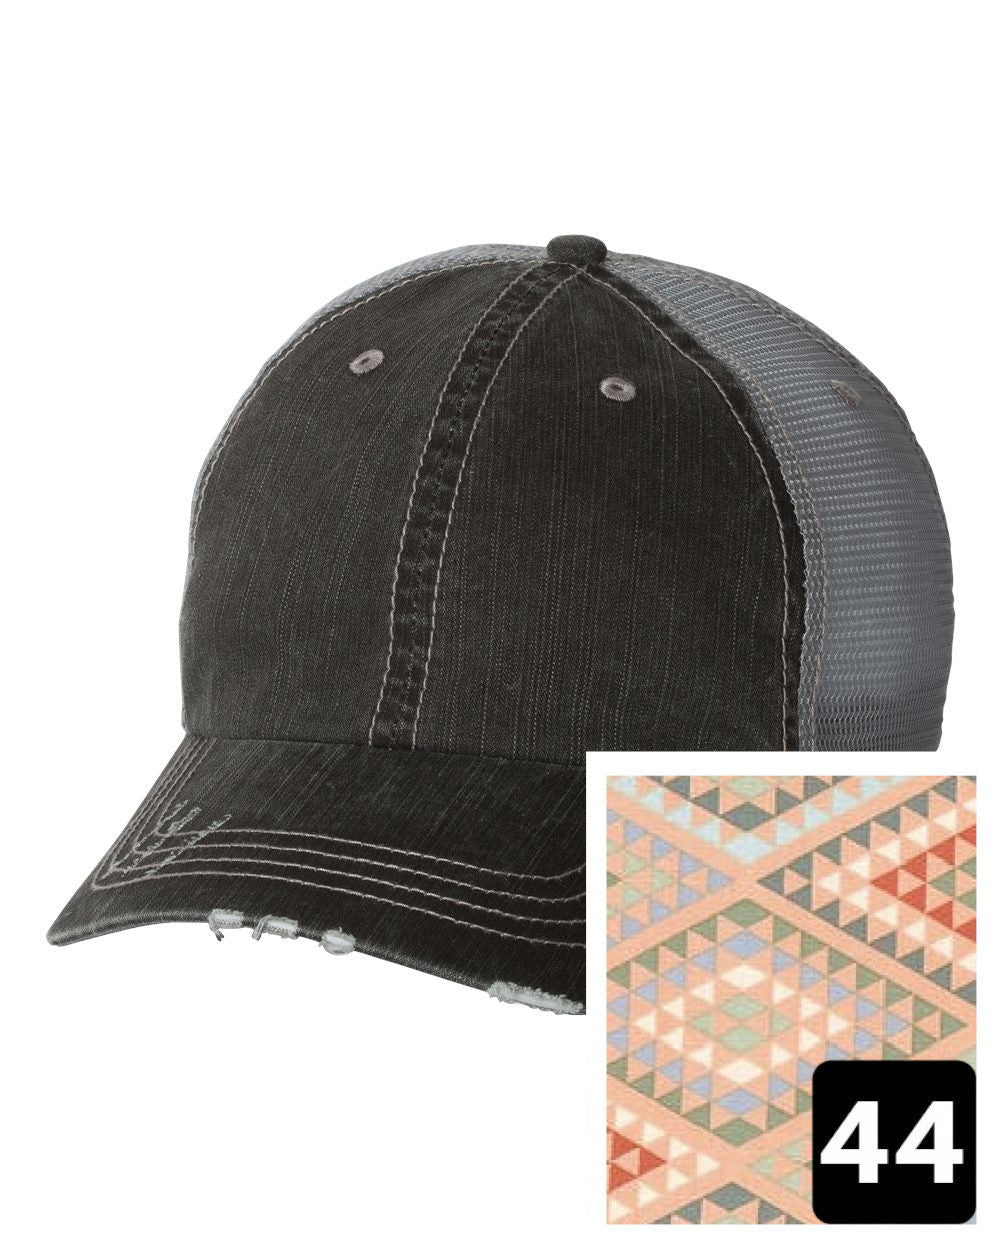 gray distressed trucker hat with navy coral and white chevron fabric state of West Virginia